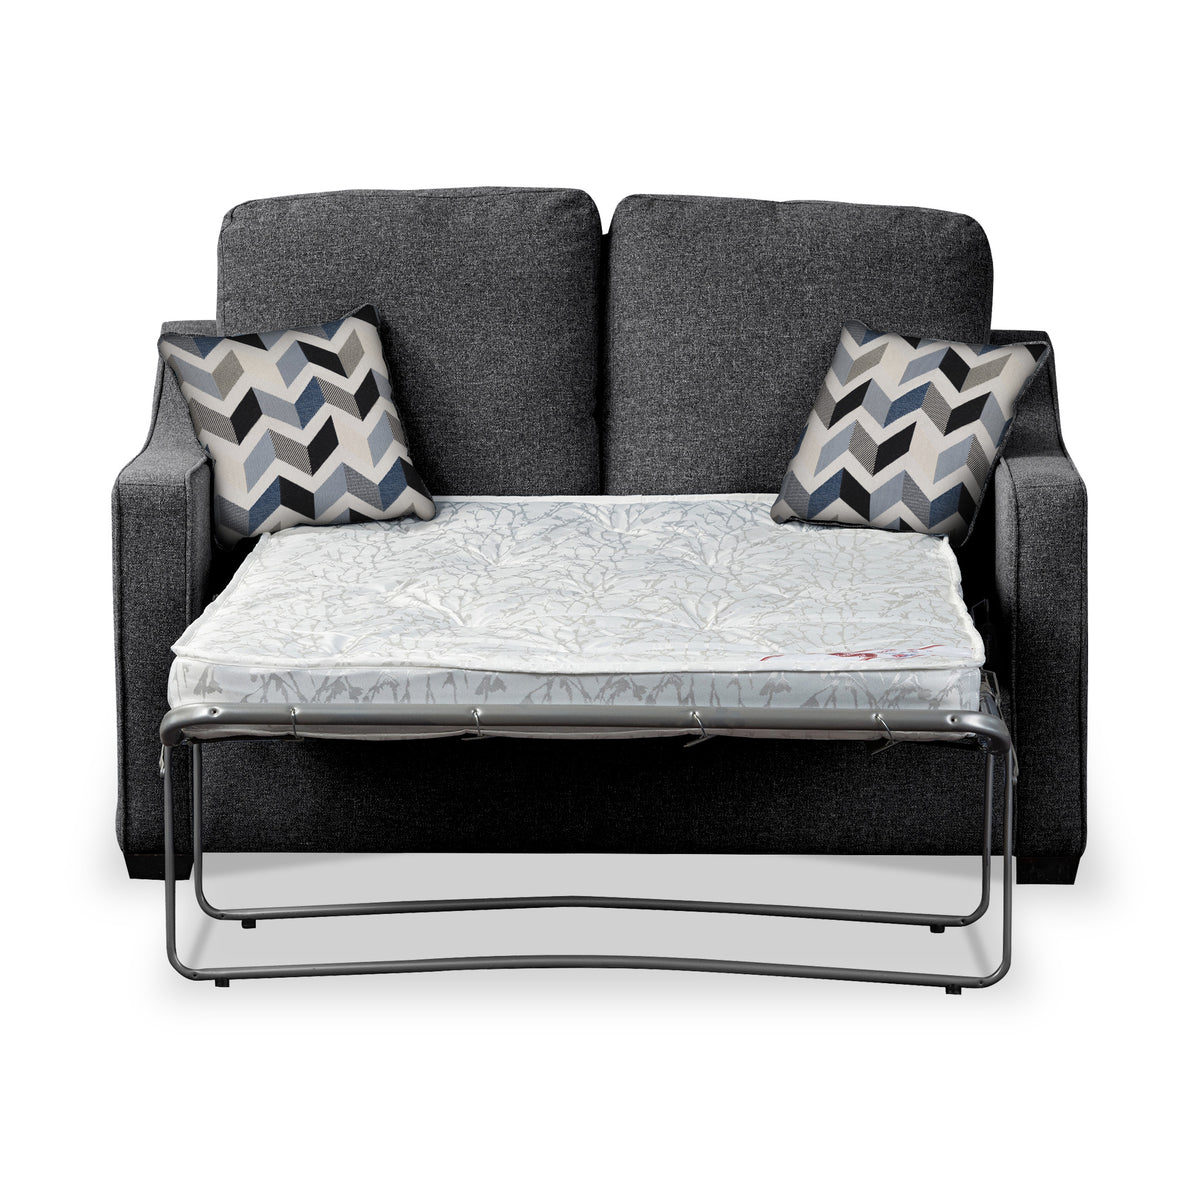 Charlcote Charcoal Faux Linen 2 Seater Sofabed with Denim Scatter Cushions from Roseland Furniture